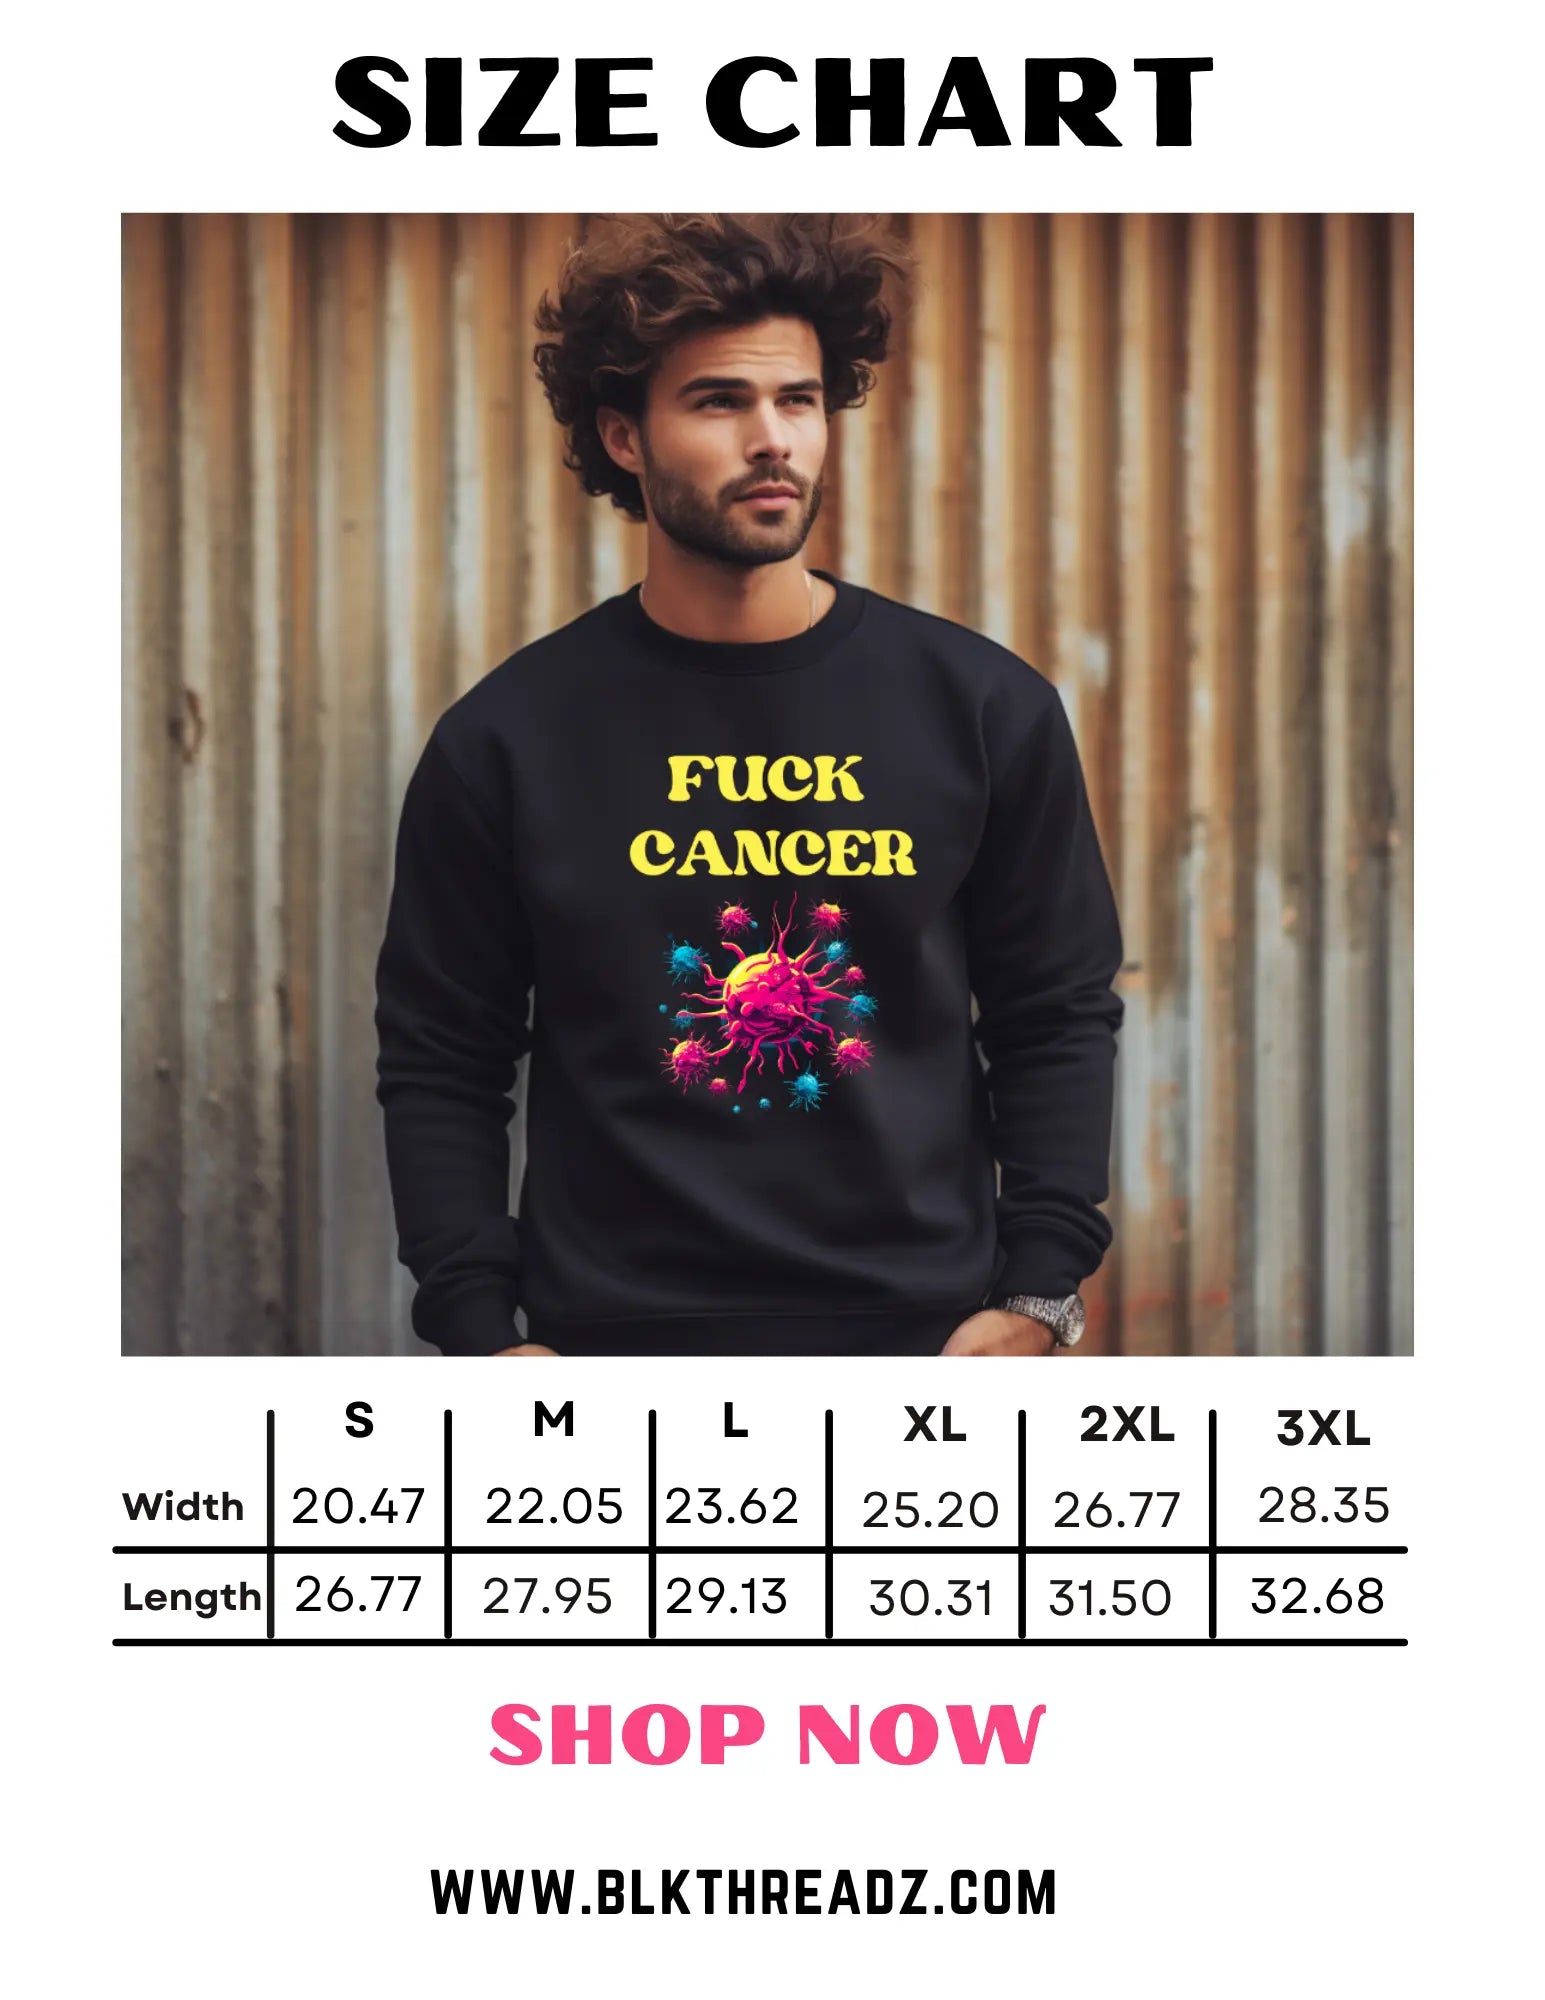 She is My Forever: Celebrate Love with this Lesbian Couple Valentine's Day Sweatshirt - Black Threadz